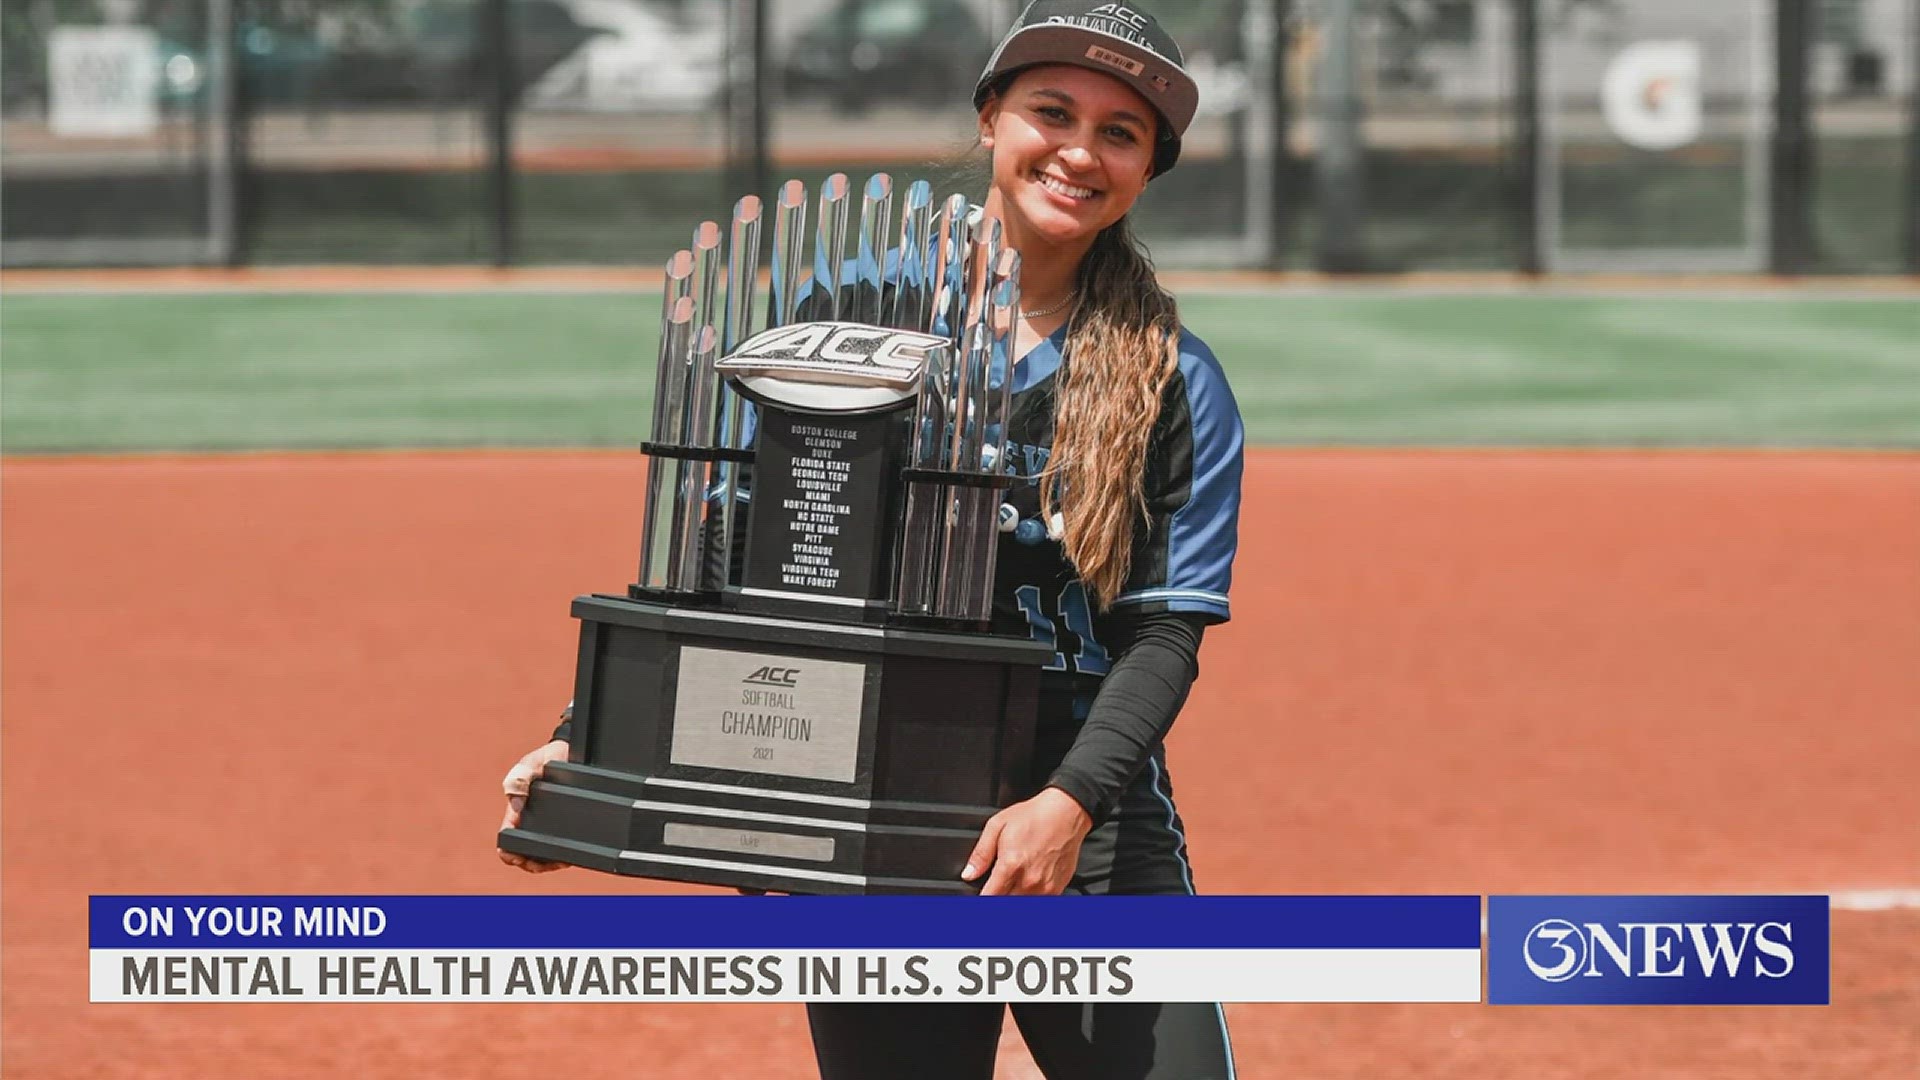 3NEWS spoke with experts who said that being a student athlete comes with its own set of challanges.